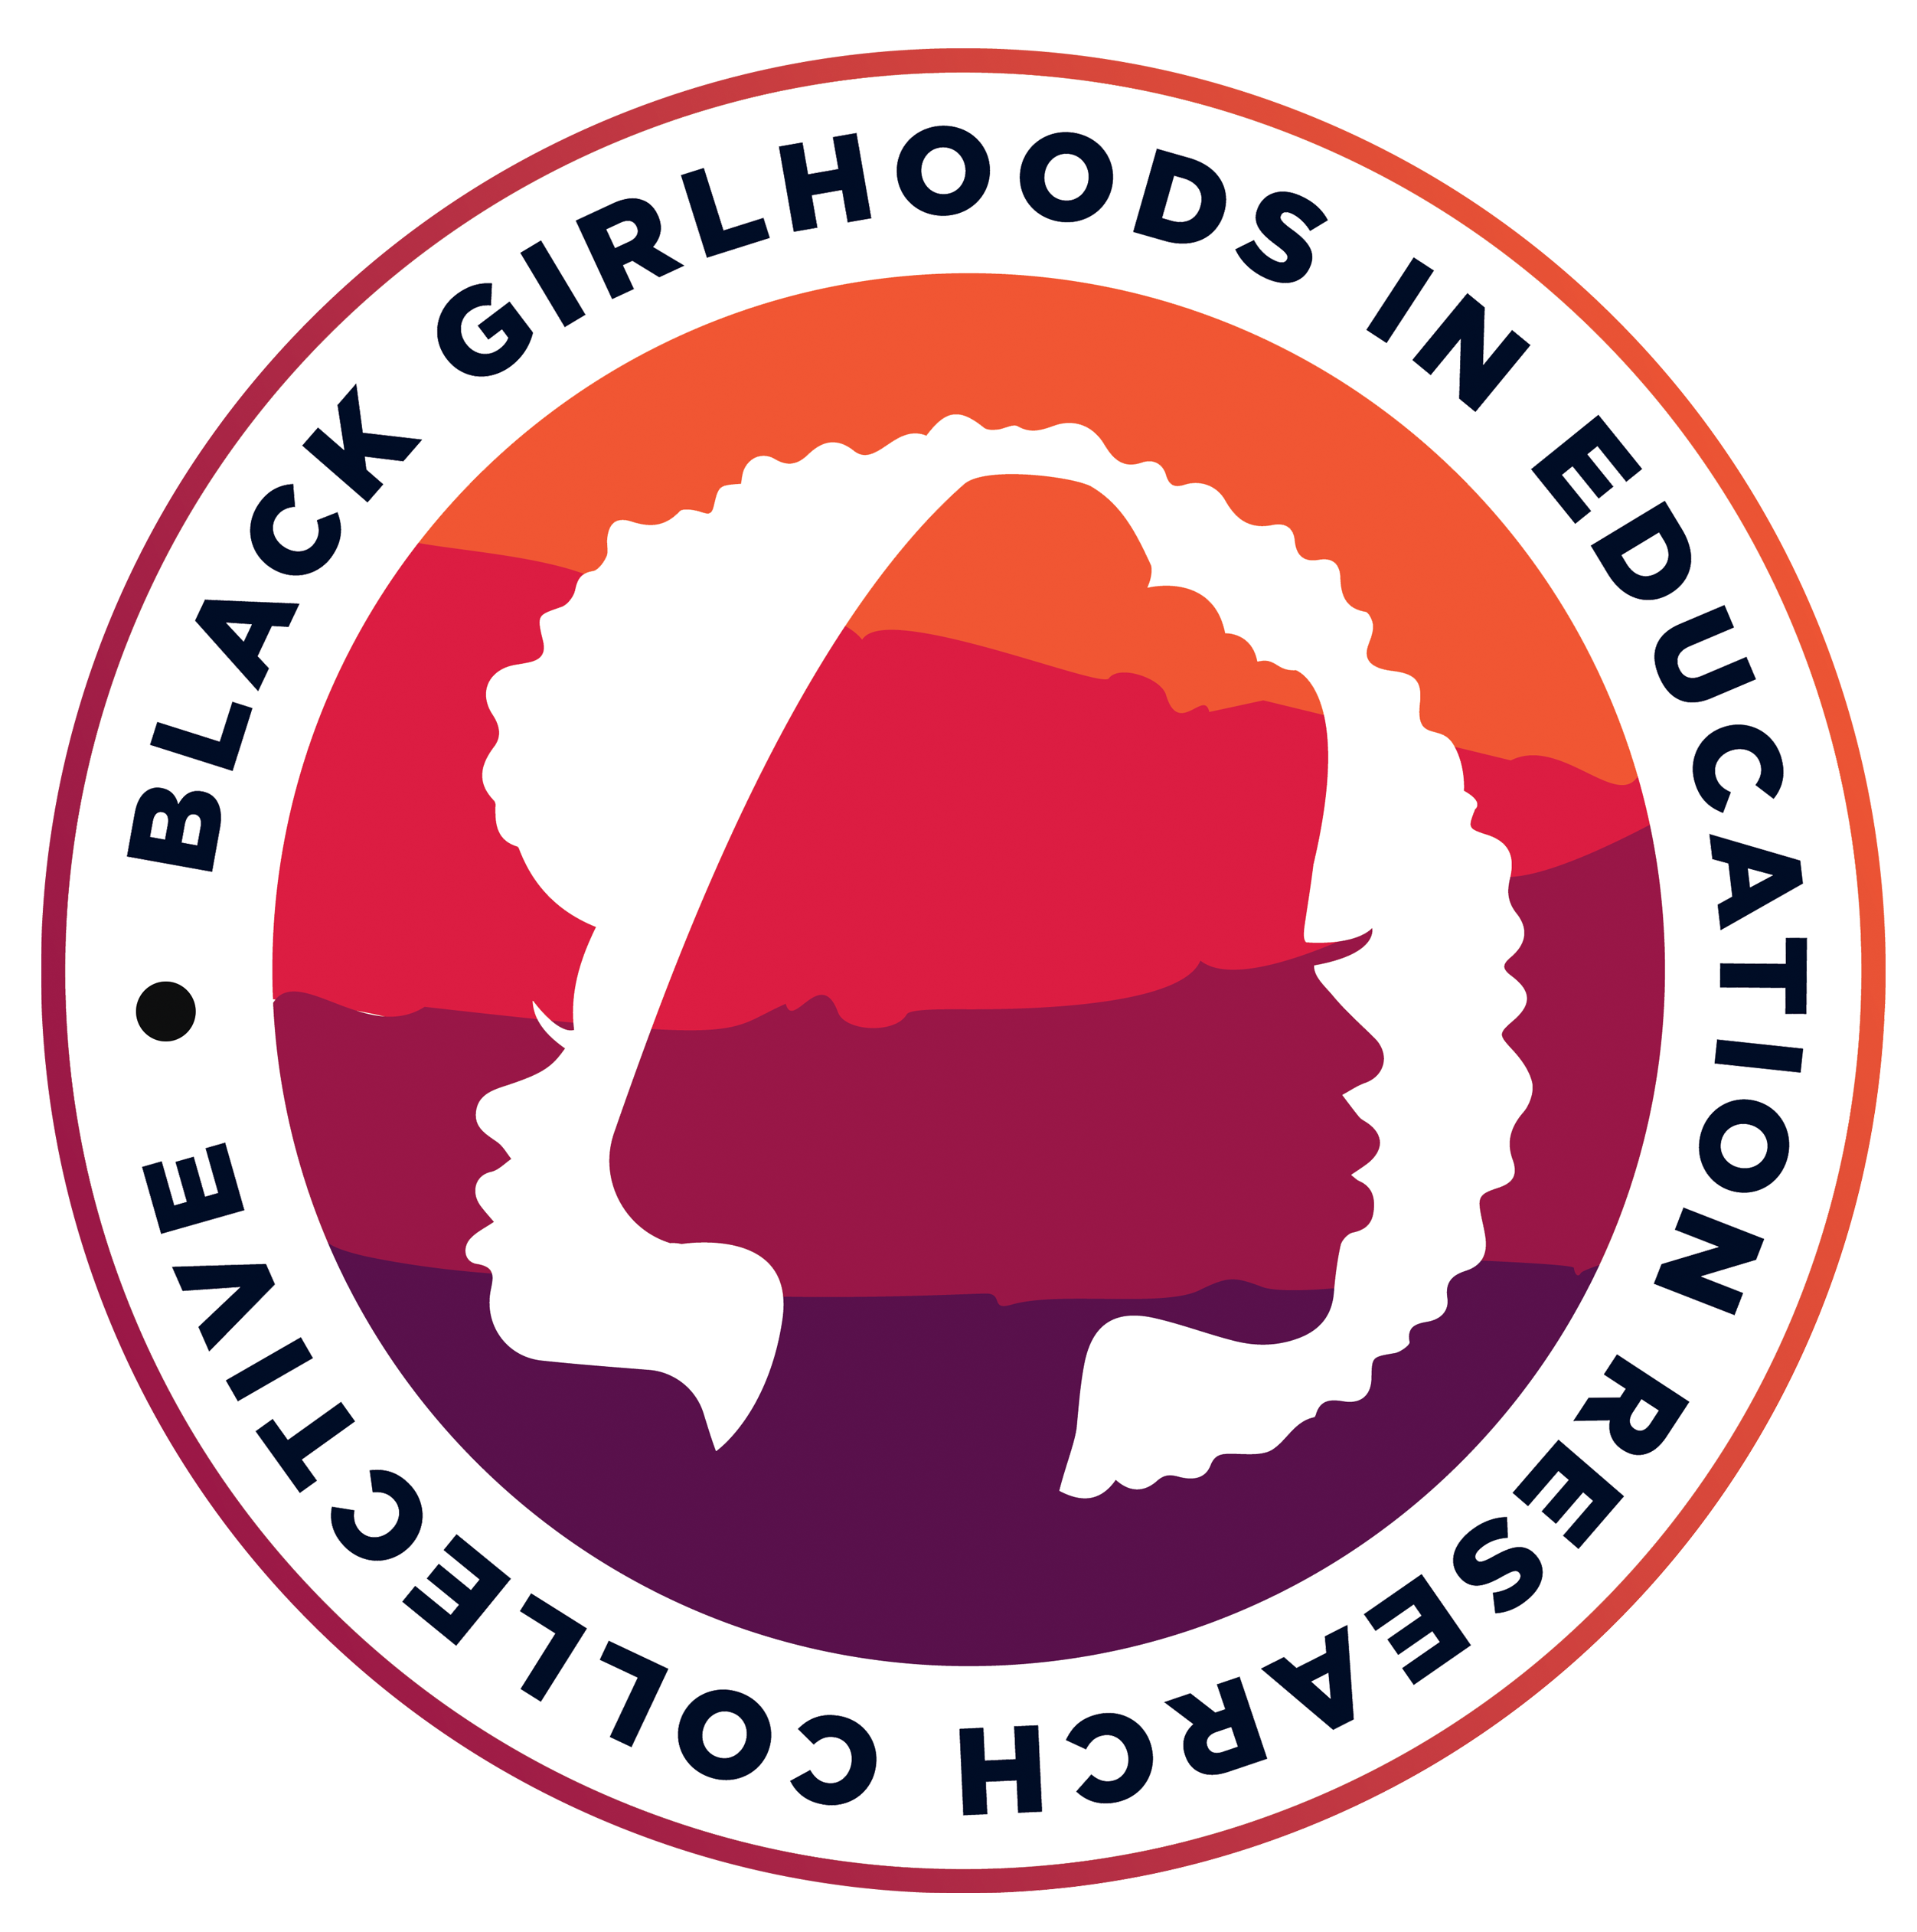 Black Girlhoods in Education Research Collective